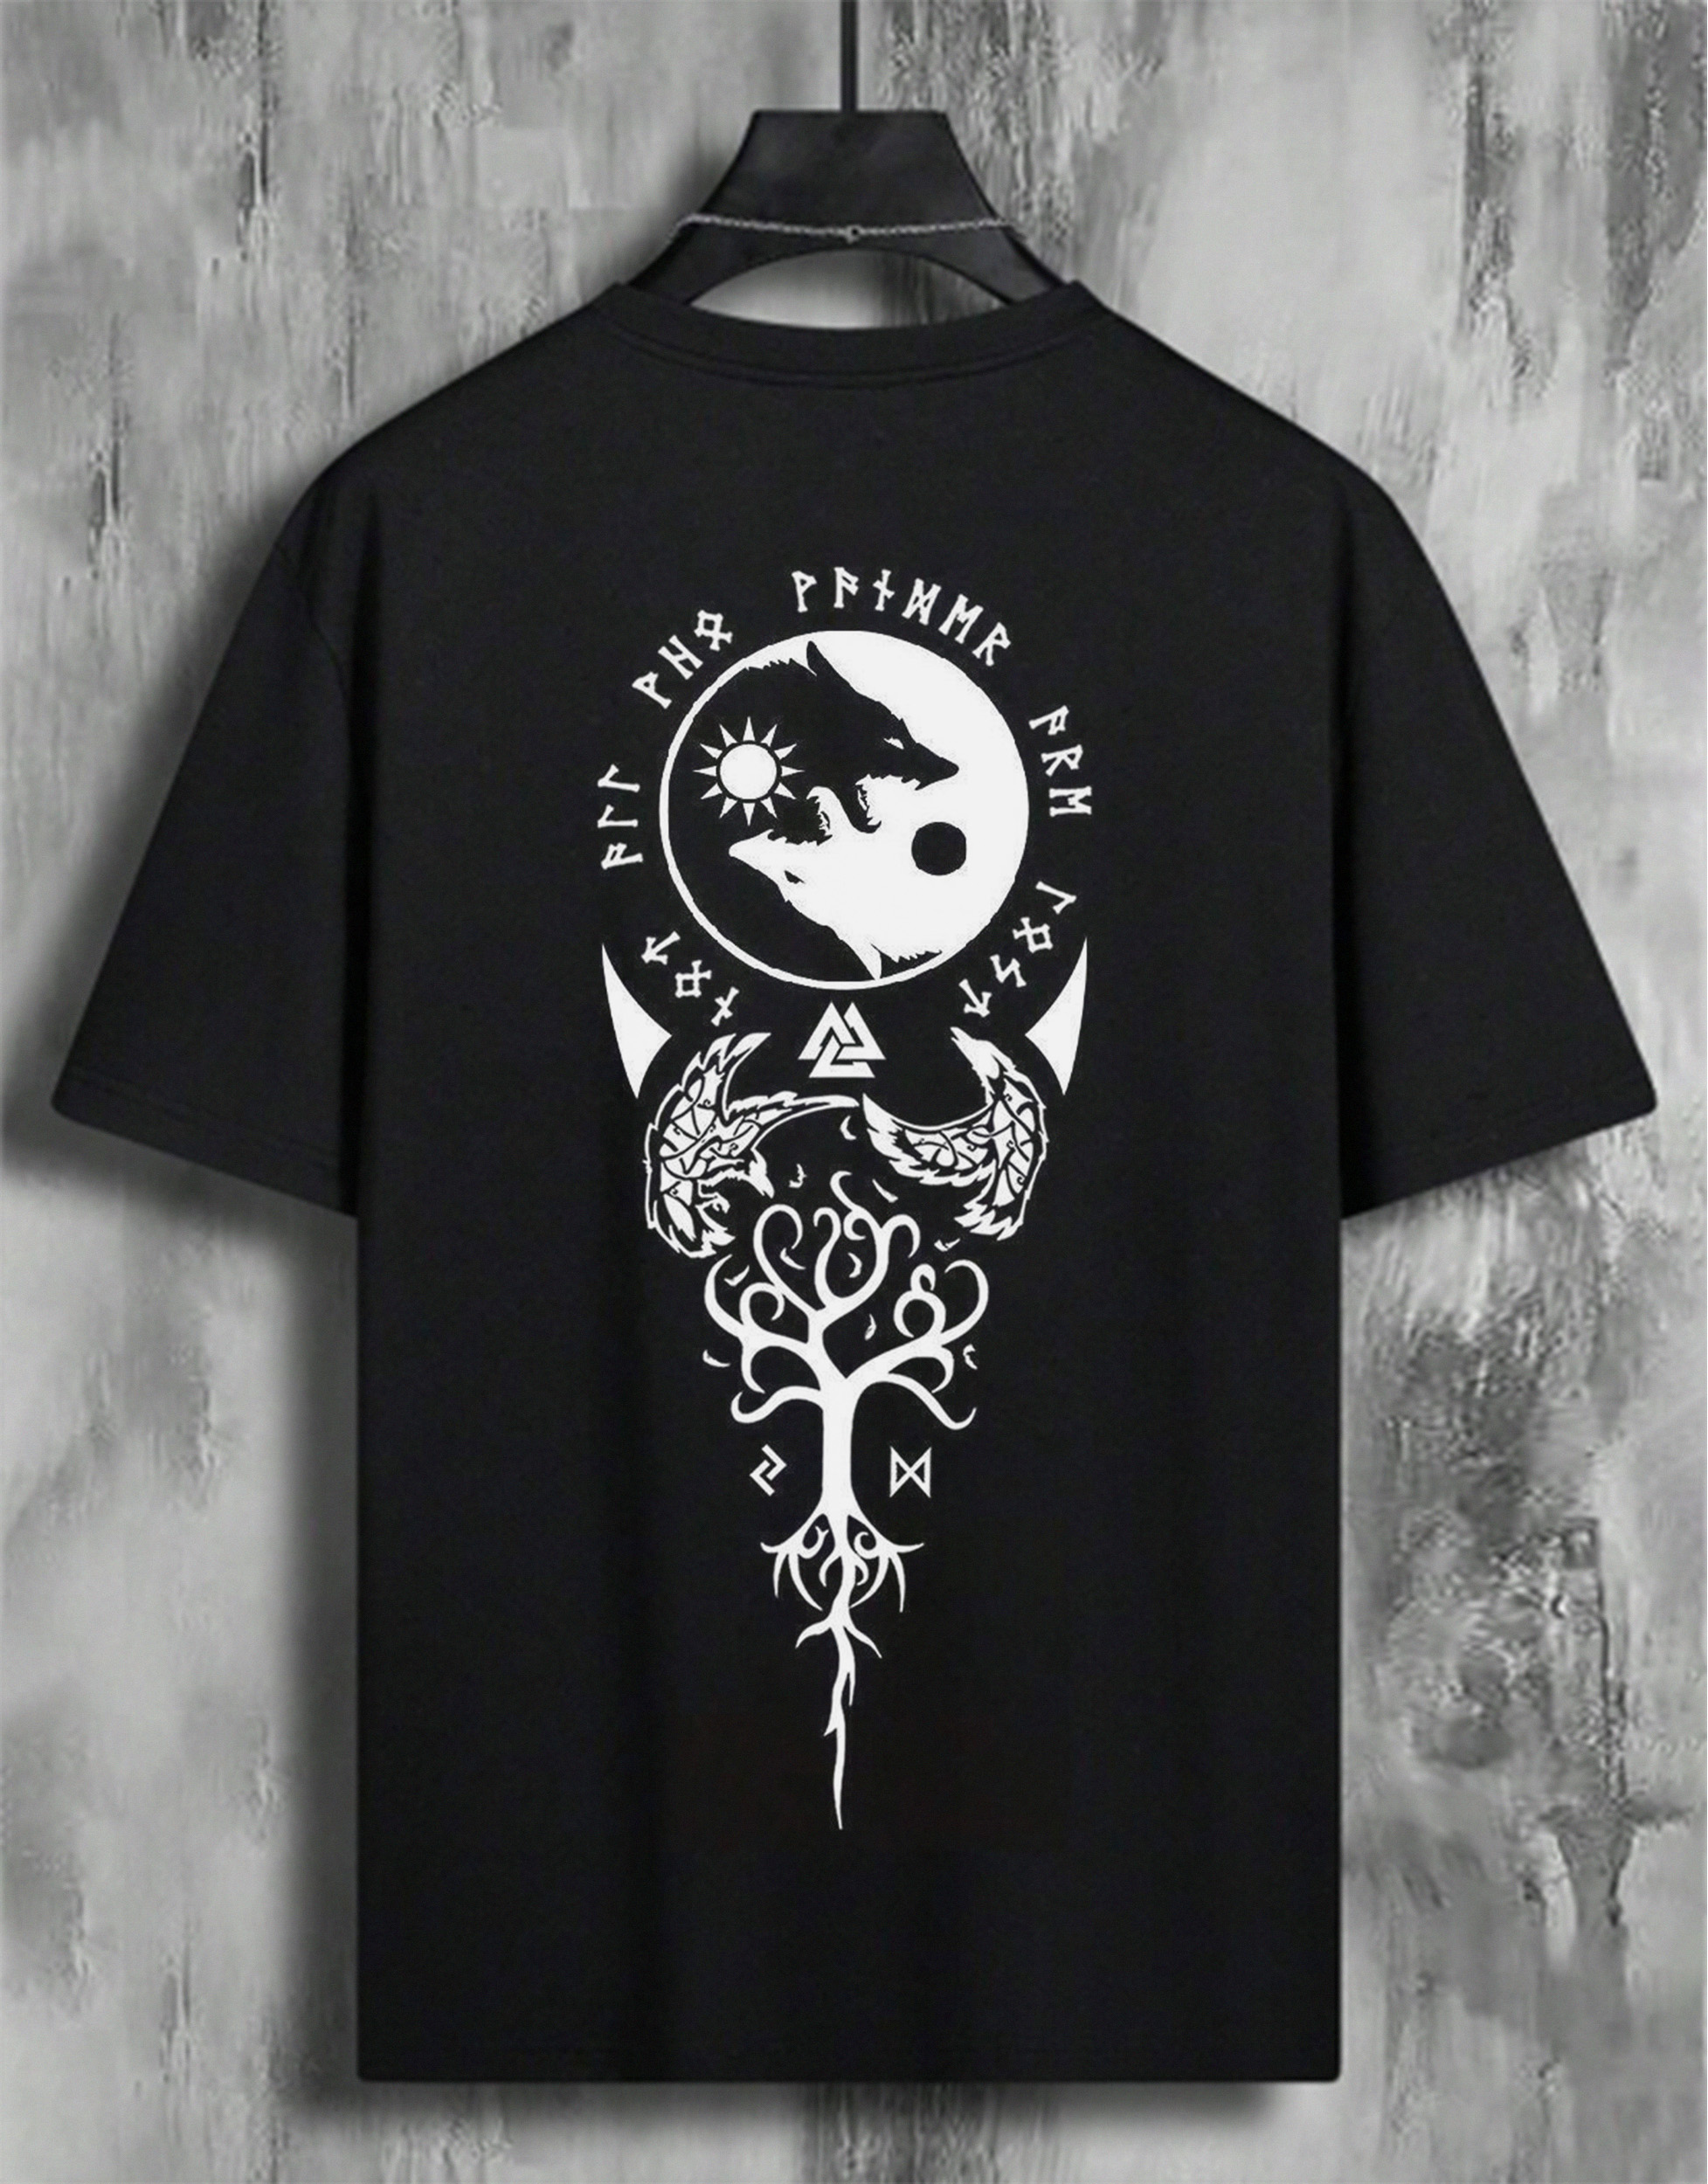 "Not all who wander are lost"Artistic Totem Print Vintage T-shirt Techwear Shop